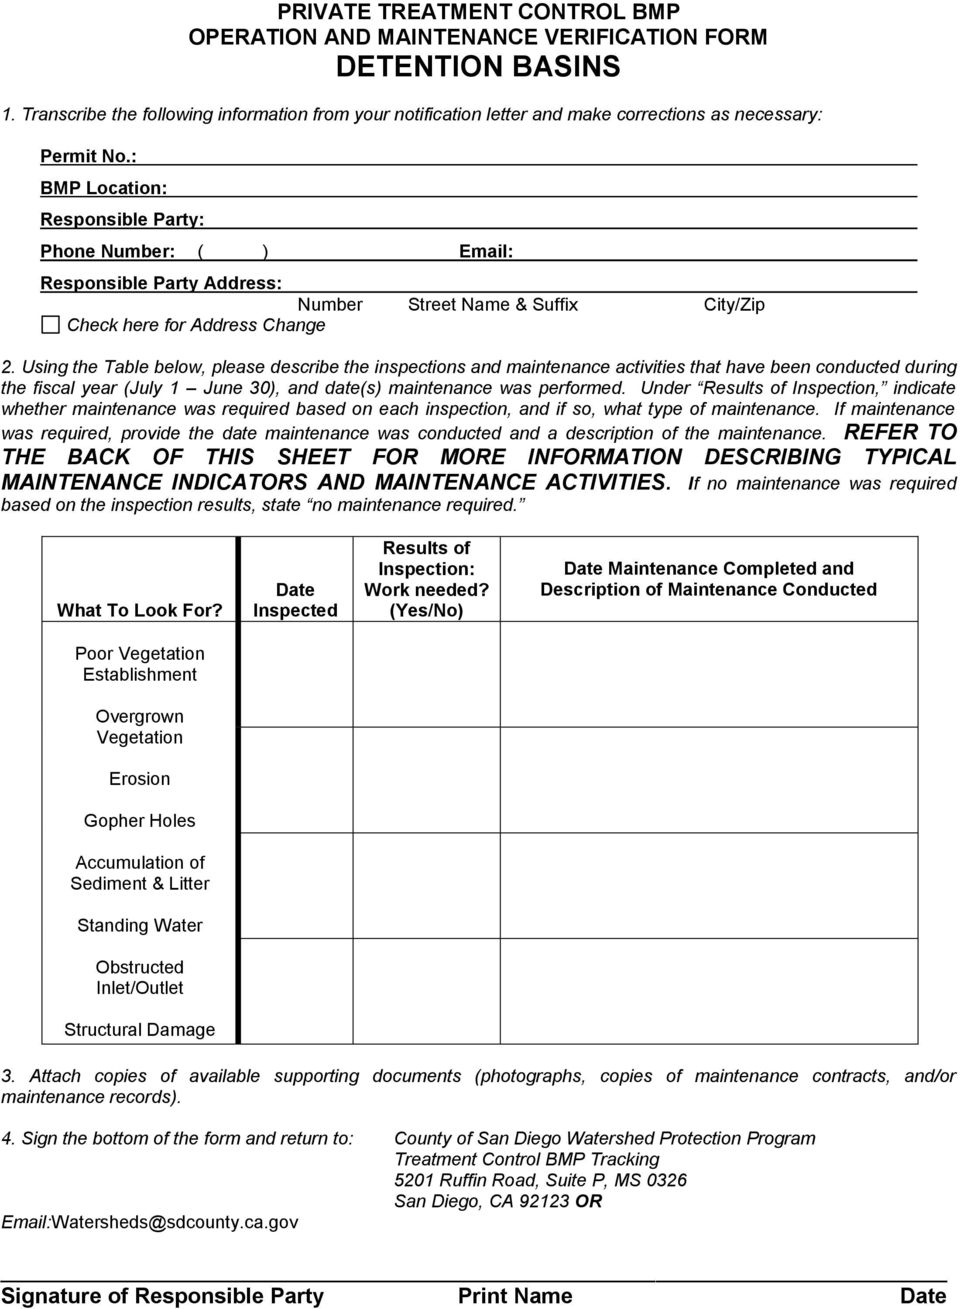 REFER TO THE BACK OF THIS SHEET FOR MORE INFORMATION DESCRIBING TYPICAL MAINTENANCE INDICATORS AND MAINTENANCE ACTIVITIES.